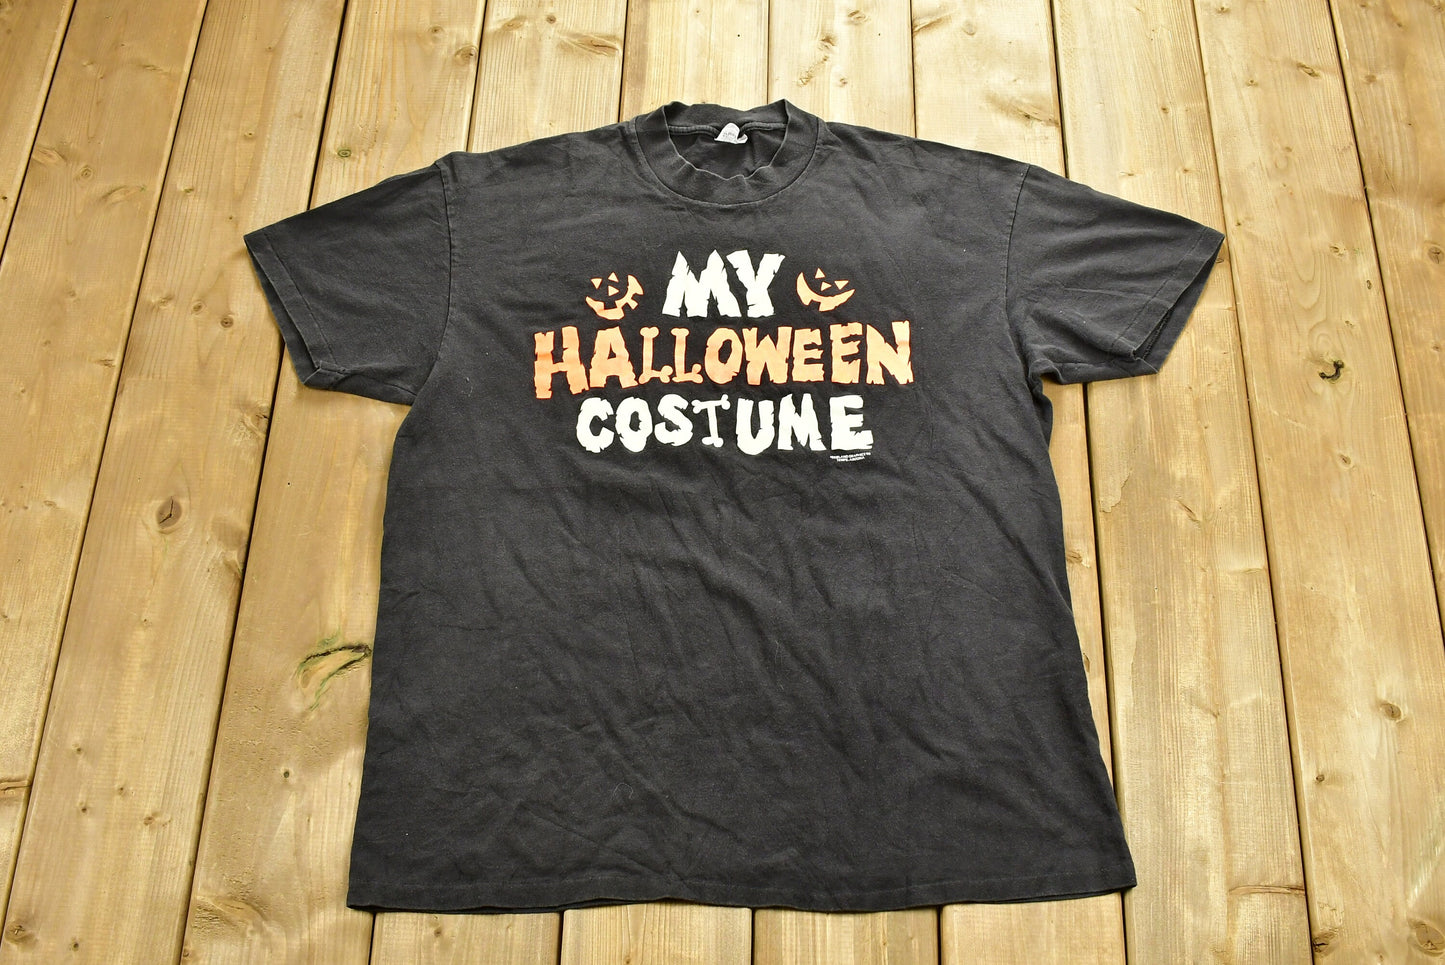 Vintage 1988 &quot;My Halloween Costume&quot; T-Shirt / Halloween Graphic / 80s / 90s / Streetwear / Retro Style / Single Stitch / Made In USA